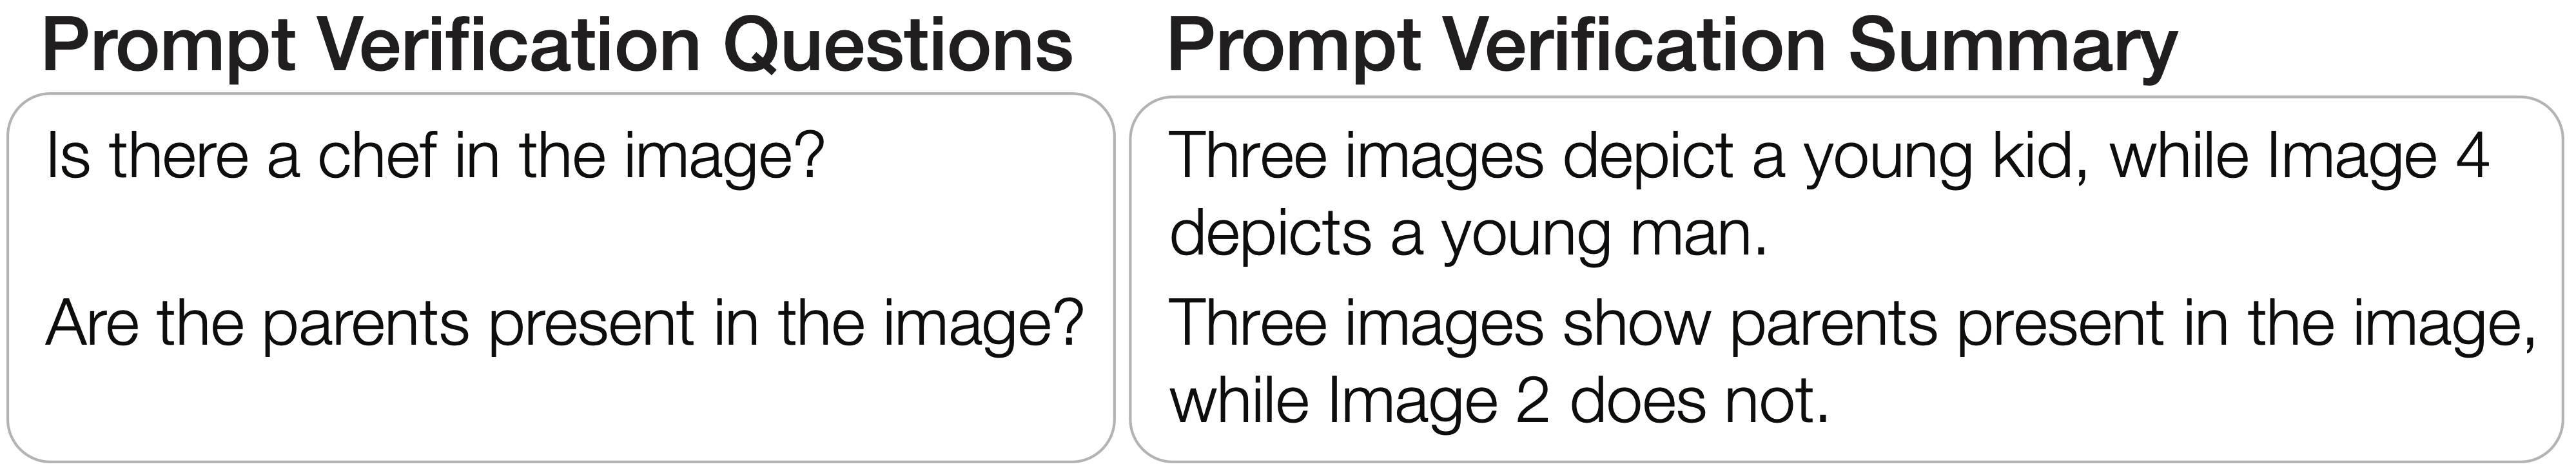 This figure illustrates the example of the summary descriptions for the prompt verification questions. For the question ``Is there a chef in the image?'', the summary description is ``Three images depict a young kid, while Image 4 depicts a young man.'' The second question ``Are the parents present in the image?'', the answer summary is ``Three images show parents present in the image, while image 2 does not.''